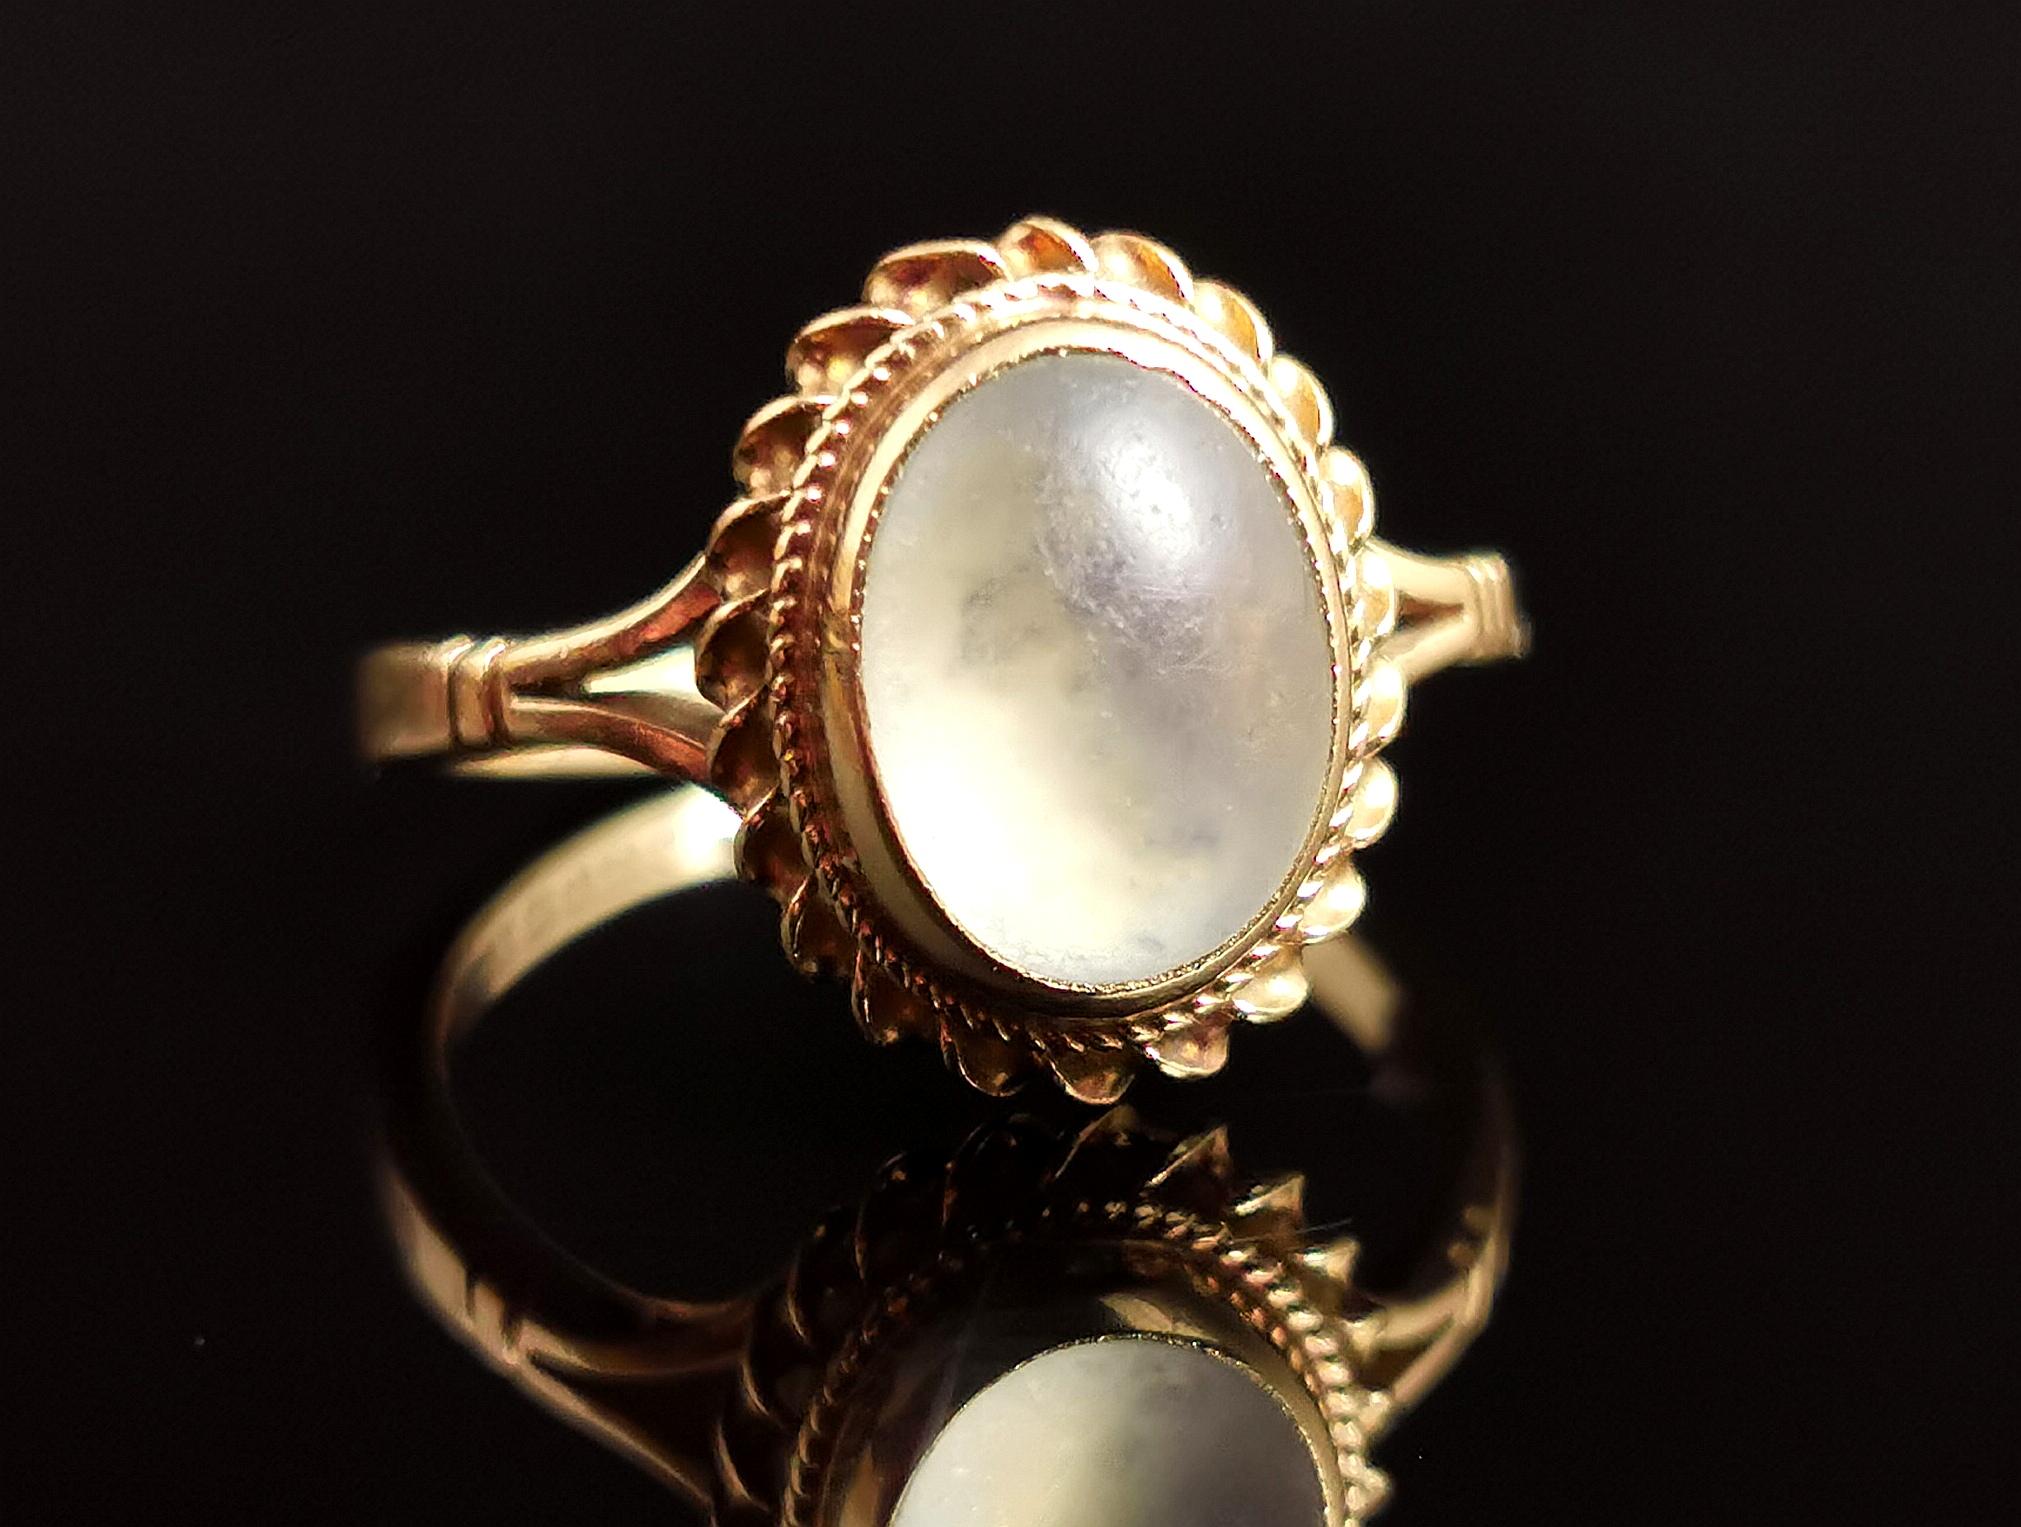 A fantastic vintage, 1970s 9kt yellow gold moonstone cabochon ring.

This ring is all about the centre stone, that beautiful moonstone cabochon, bezel set into the yellow gold setting with a twist and beaded frame.

The stone has some gorgeous tones